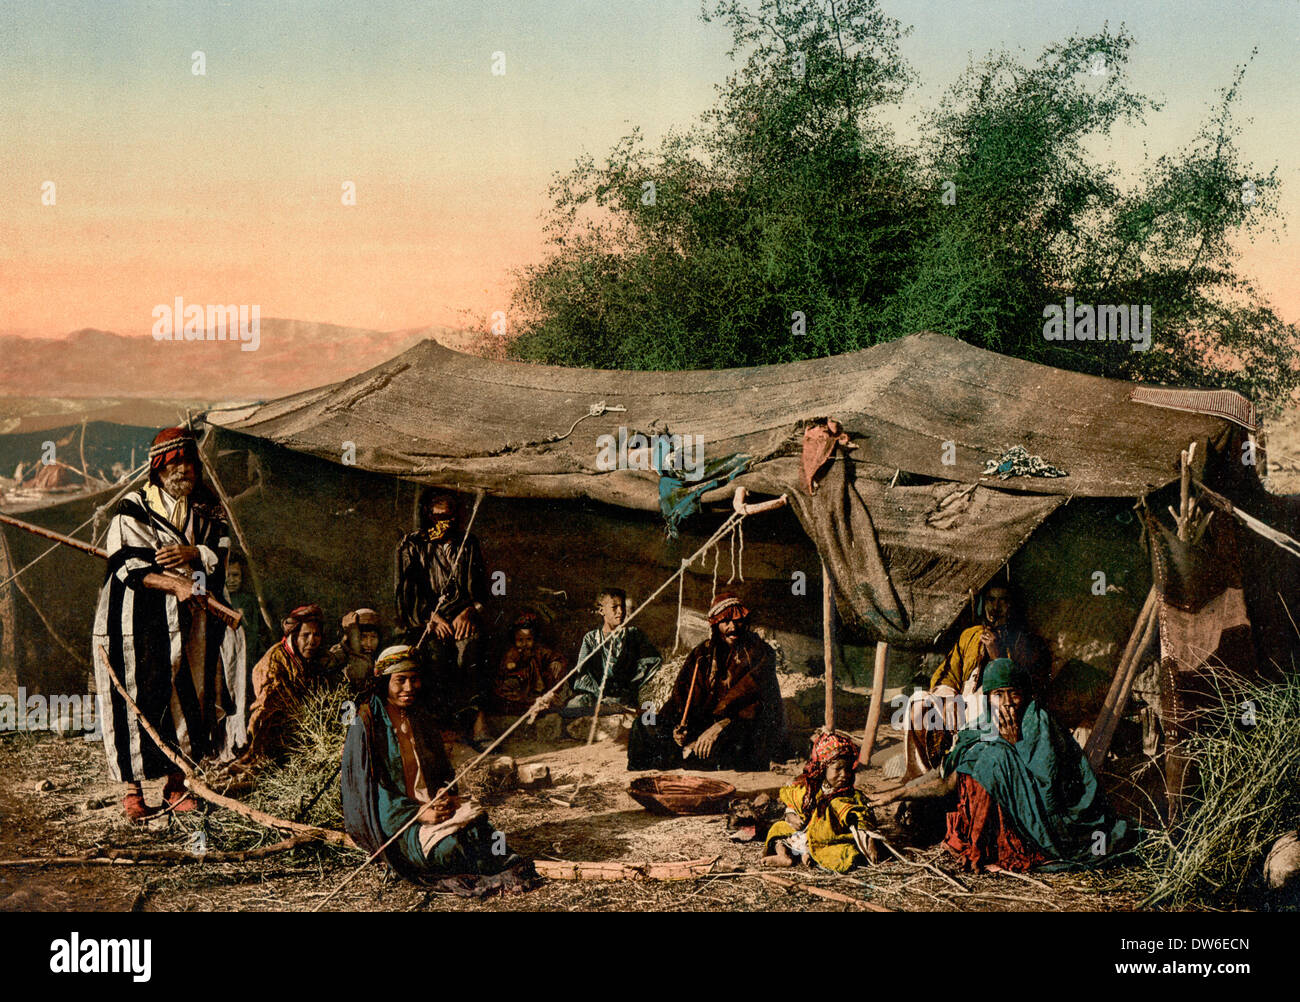 Bedouin tents and occupants, Holy Land, circa 1900 Stock Photo